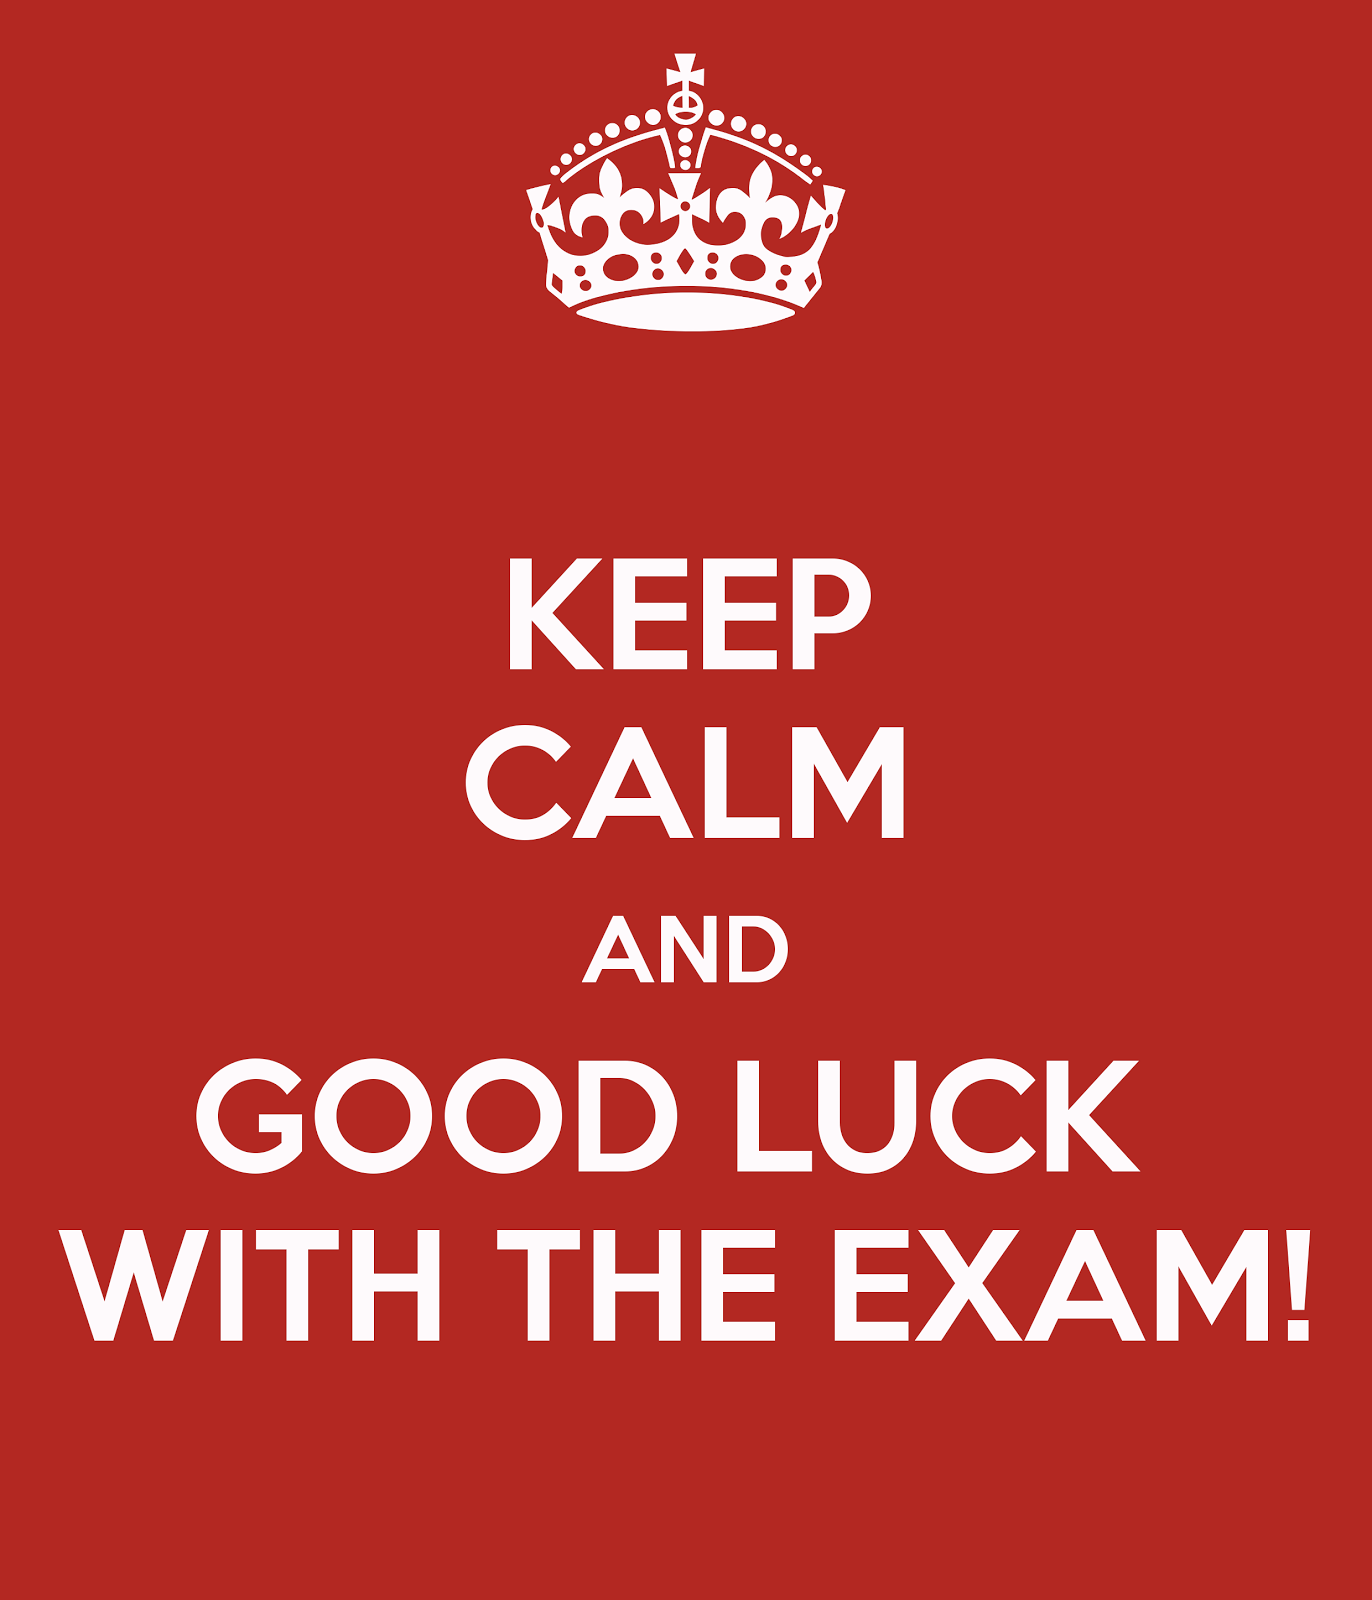 Best Of Luck Wallpaper For Exam (Picture)